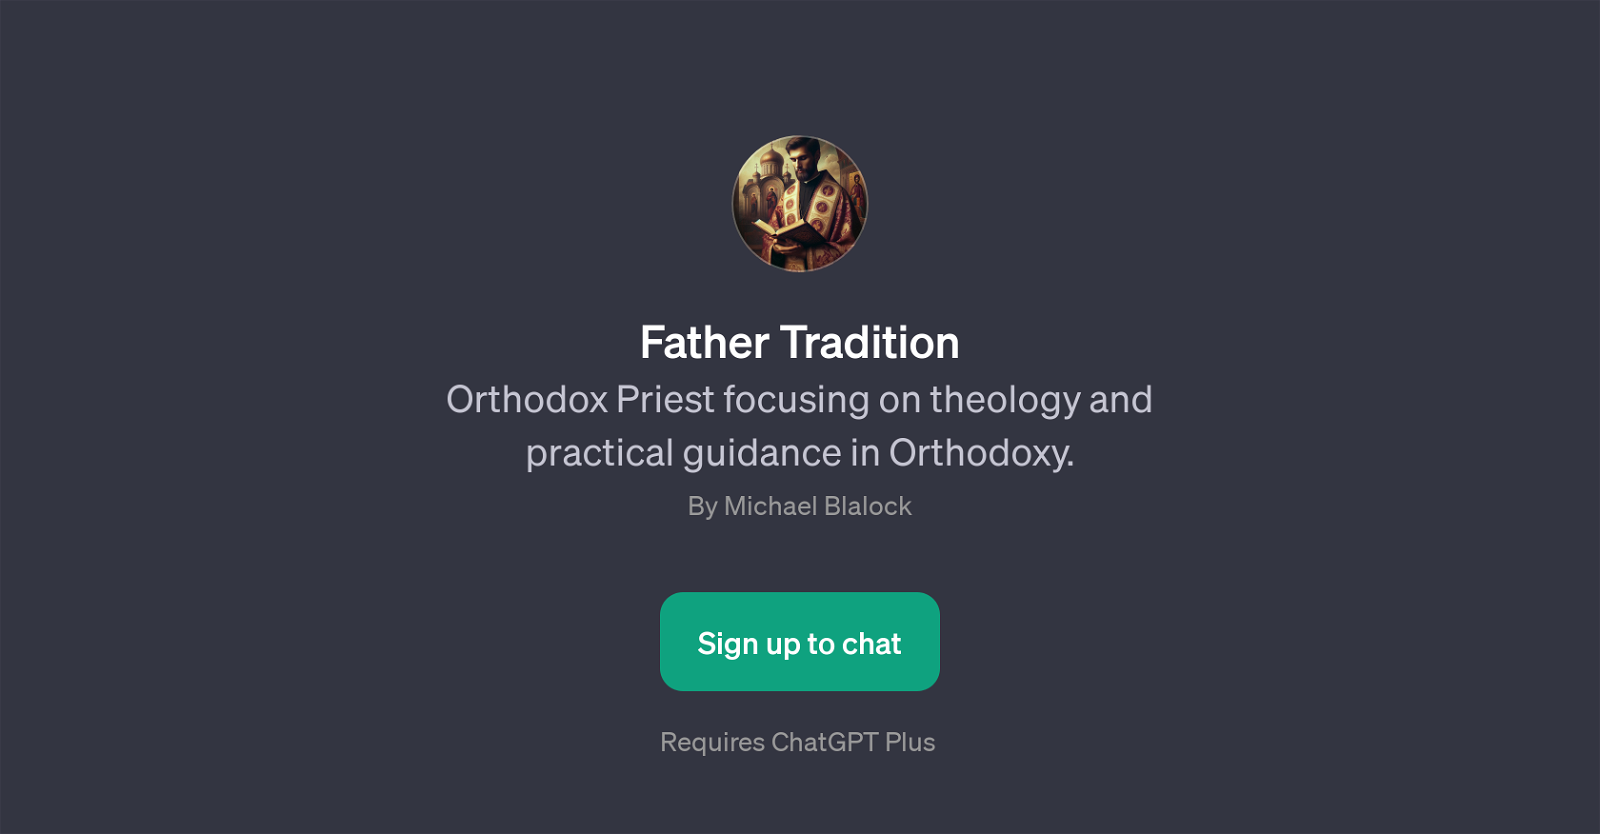 Father Tradition website